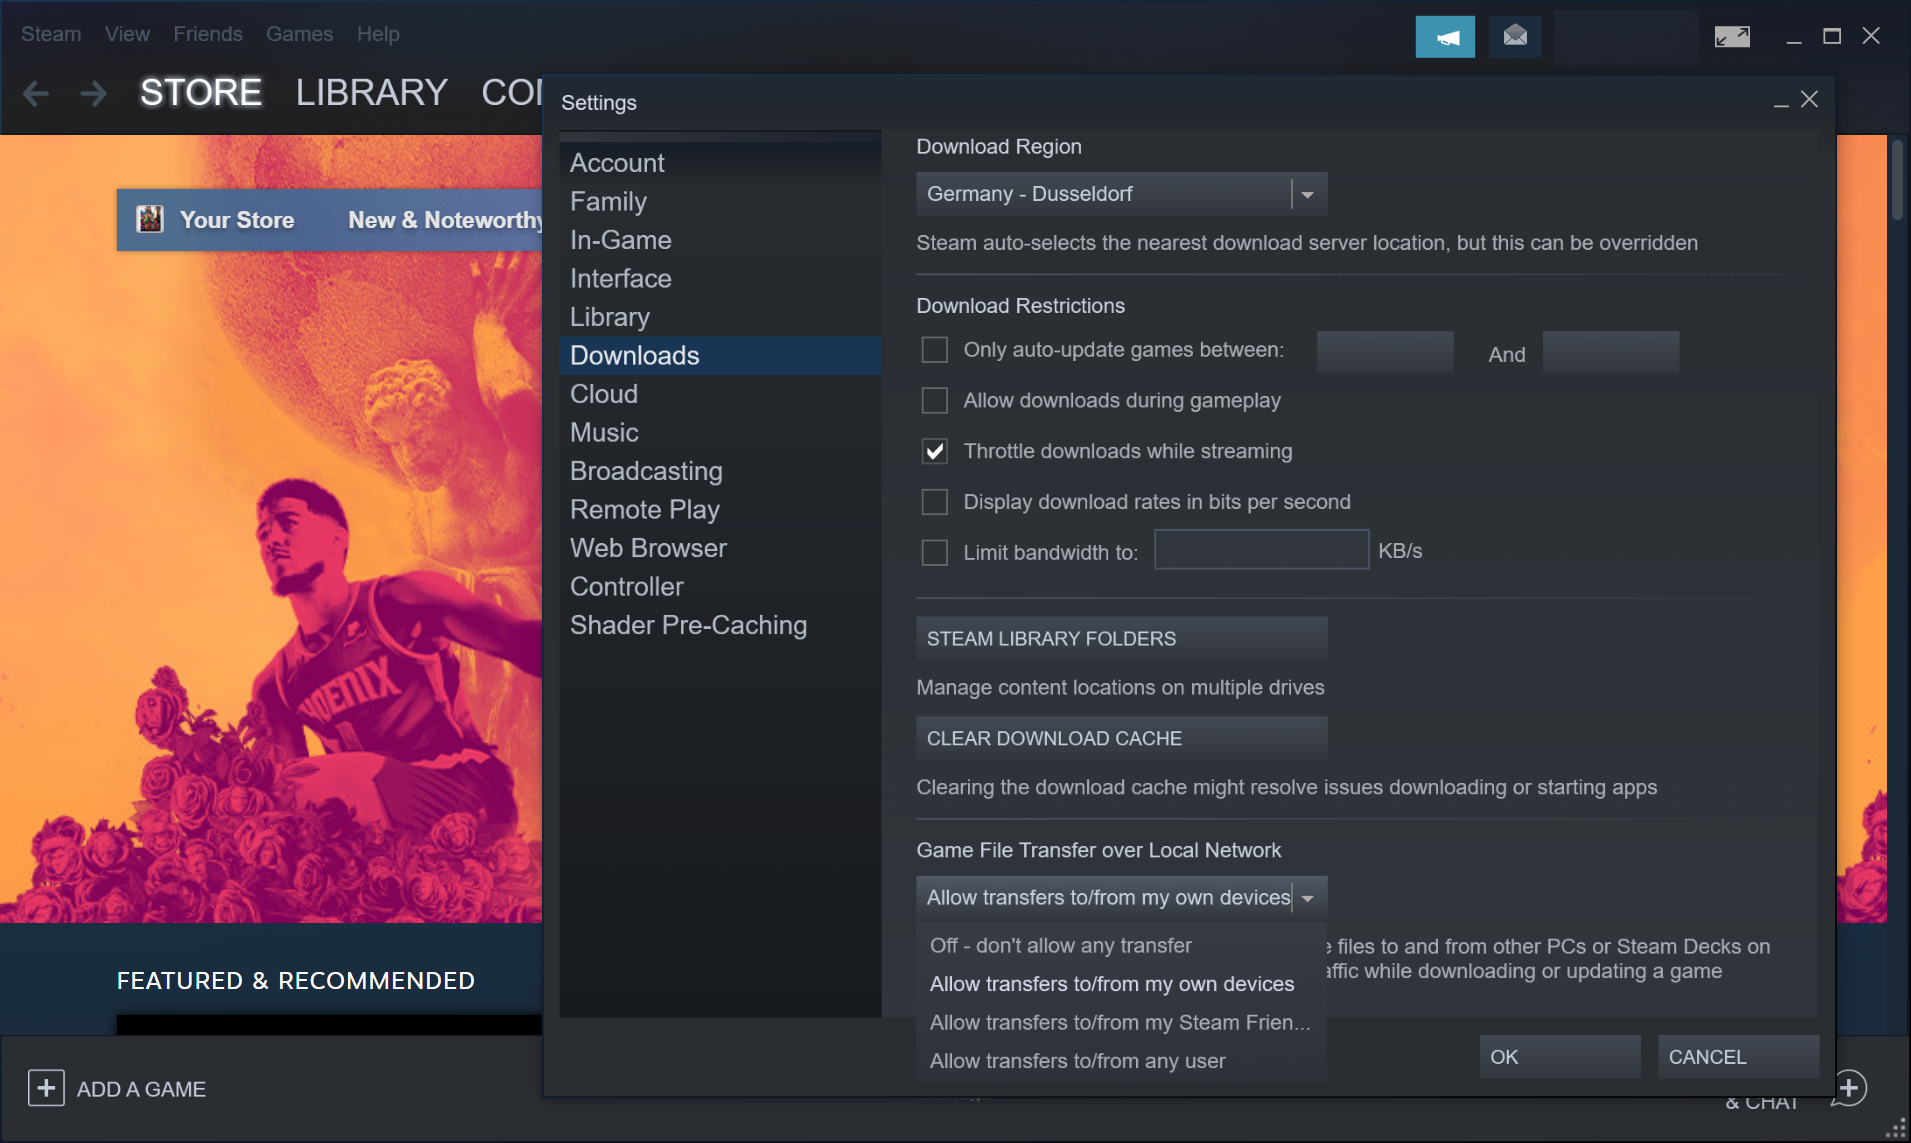 Steam Beta: Local Network Game Transfers feature added